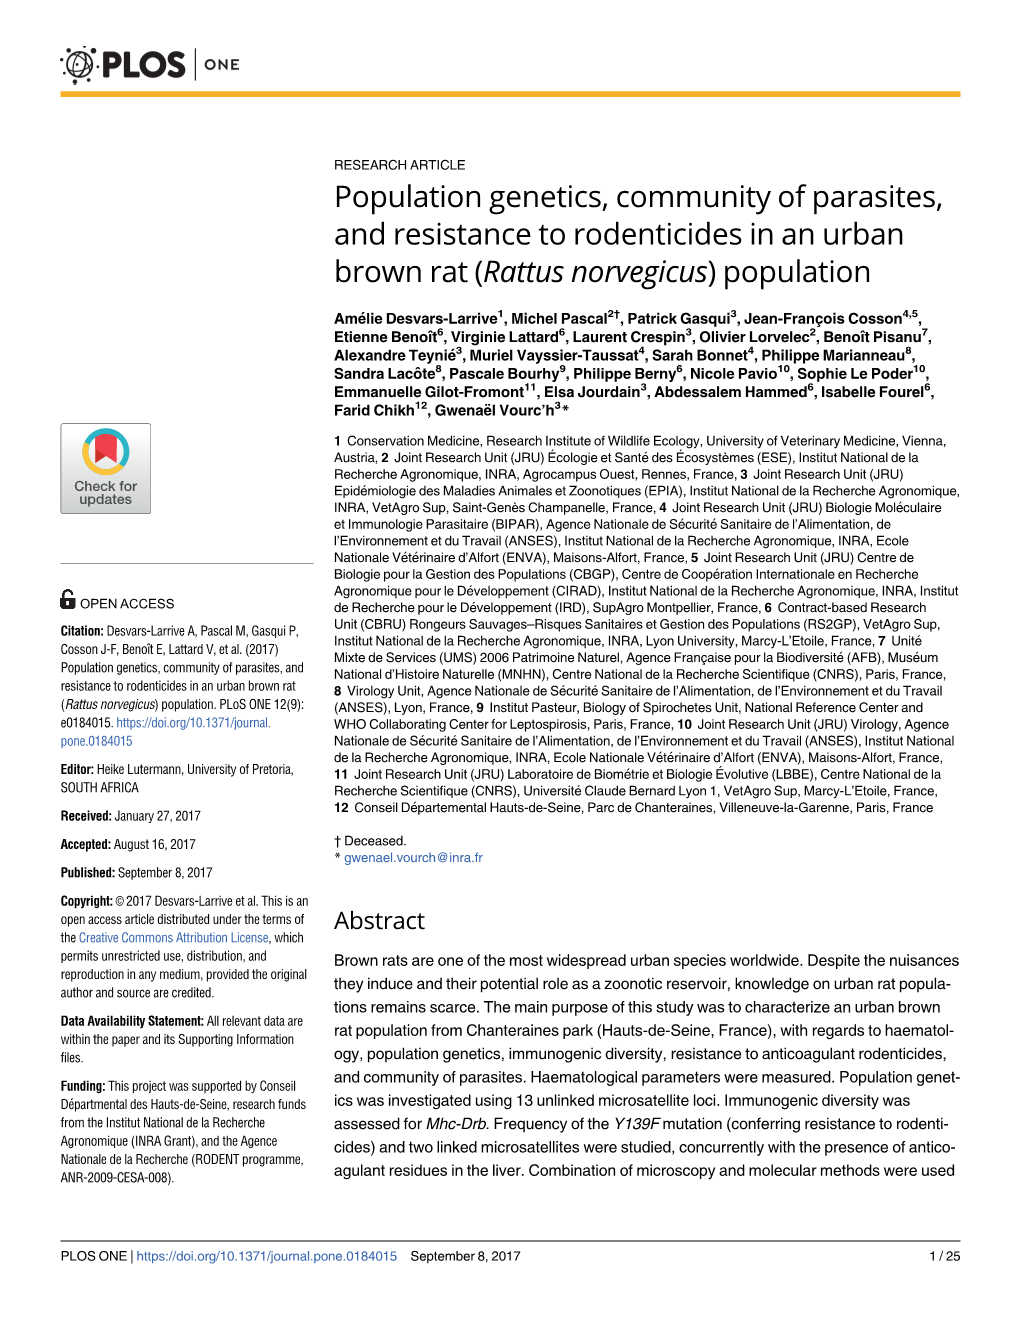 Population Genetics, Community of Parasites, and Resistance to Rodenticides in an Urban Brown Rat (Rattus Norvegicus) Population